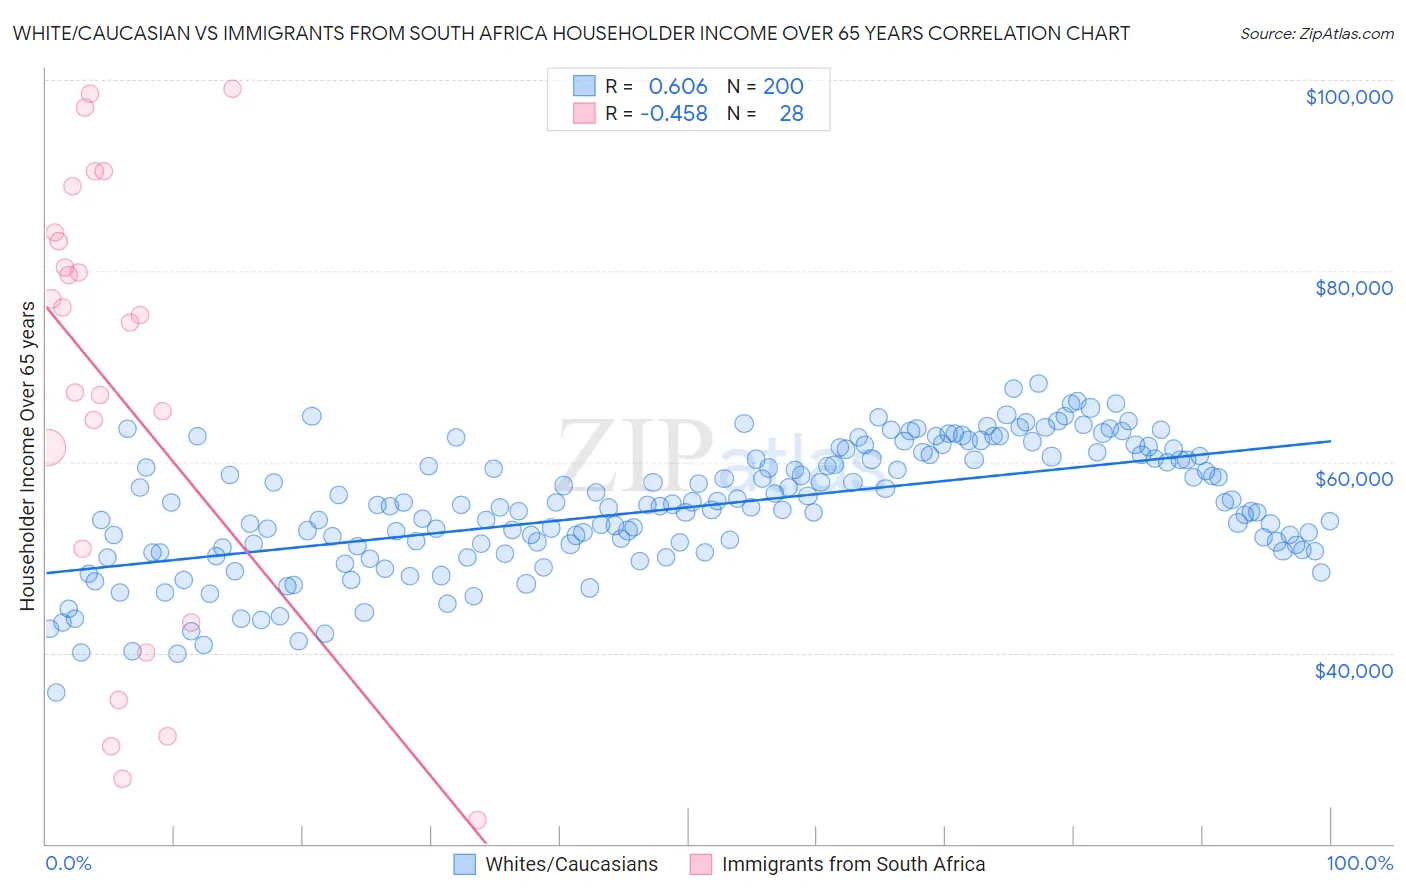 White/Caucasian vs Immigrants from South Africa Householder Income Over 65 years